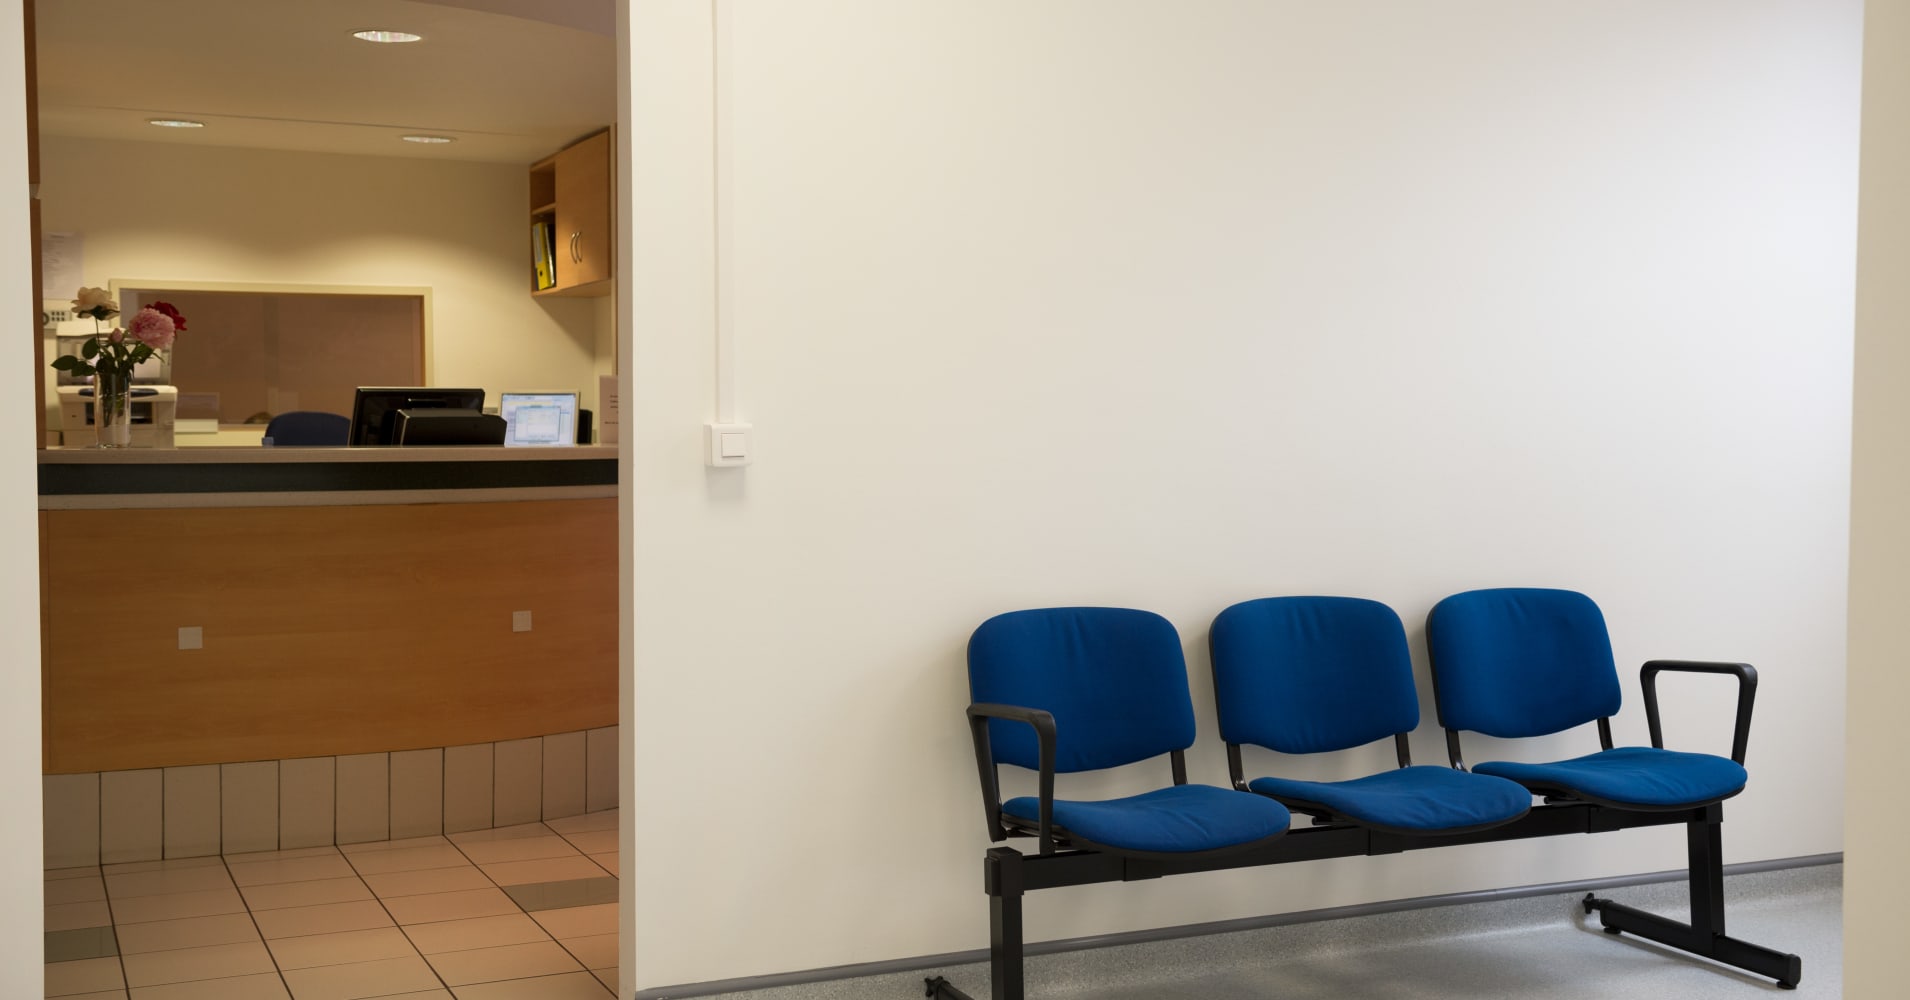 i was charged $150 for missing a doctor's appointment. turns out these fees are on the rise